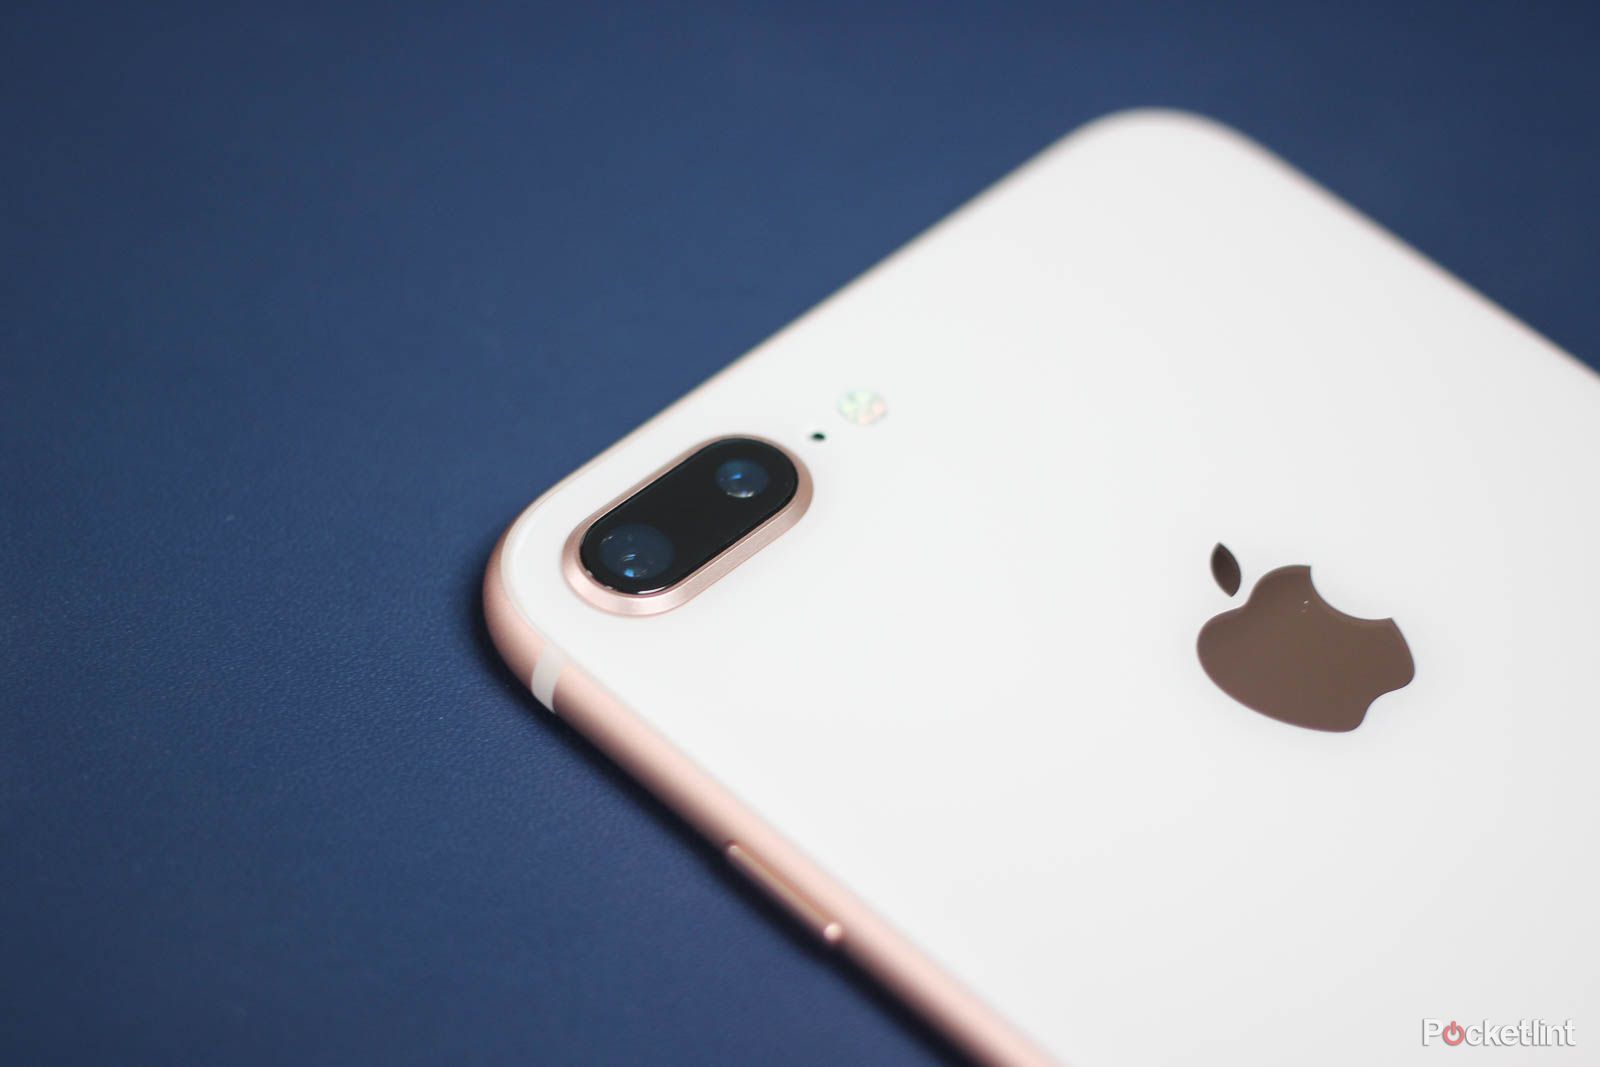 A cheap iPhone is again rumoured using iPhone 8 tech image 1